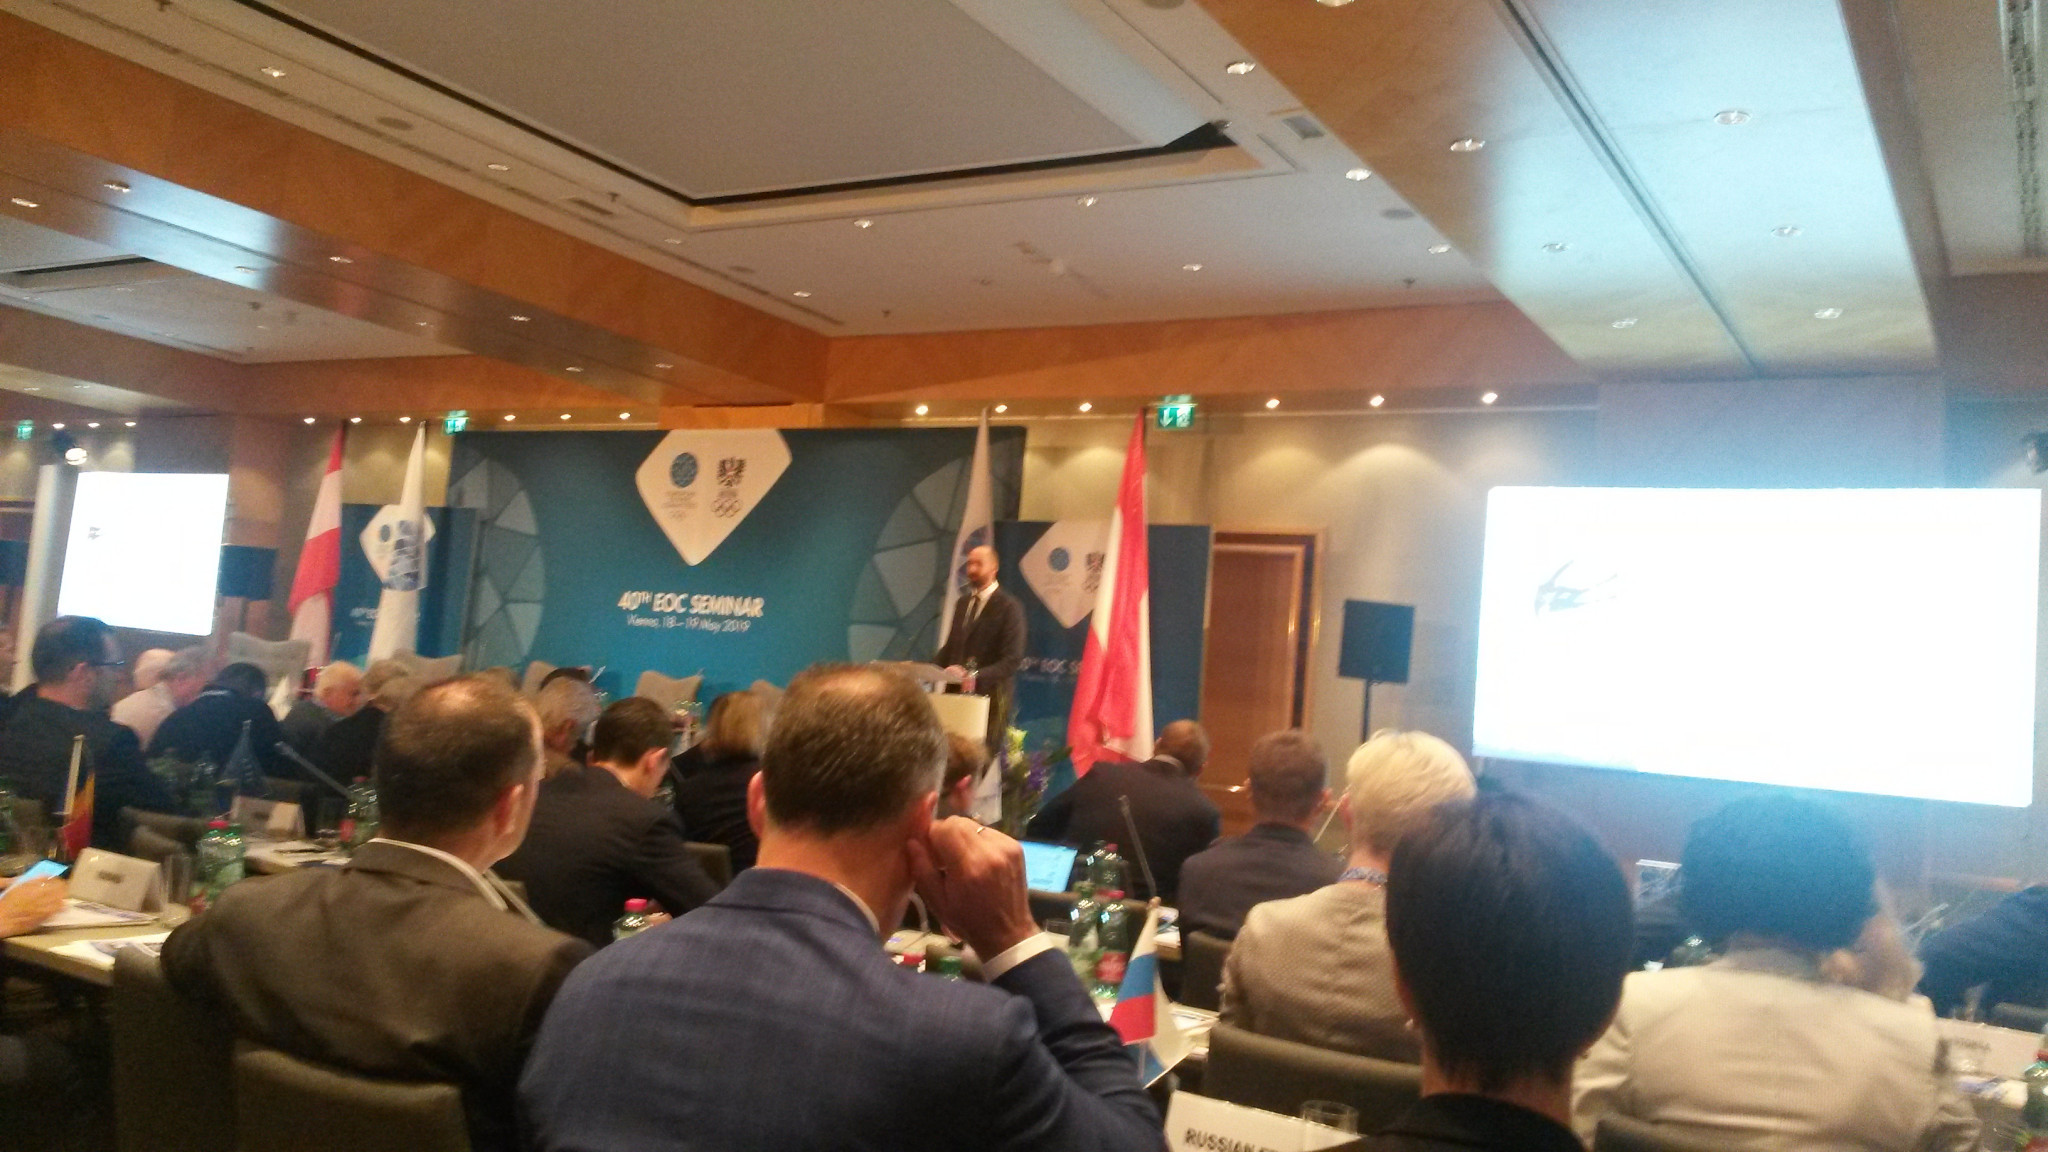 James Macleod, IOC Director NOC Relations Department and Olympic Solidarity, addresses delegates at the 40th EOC Seminar in Vienna this morning ©ITG